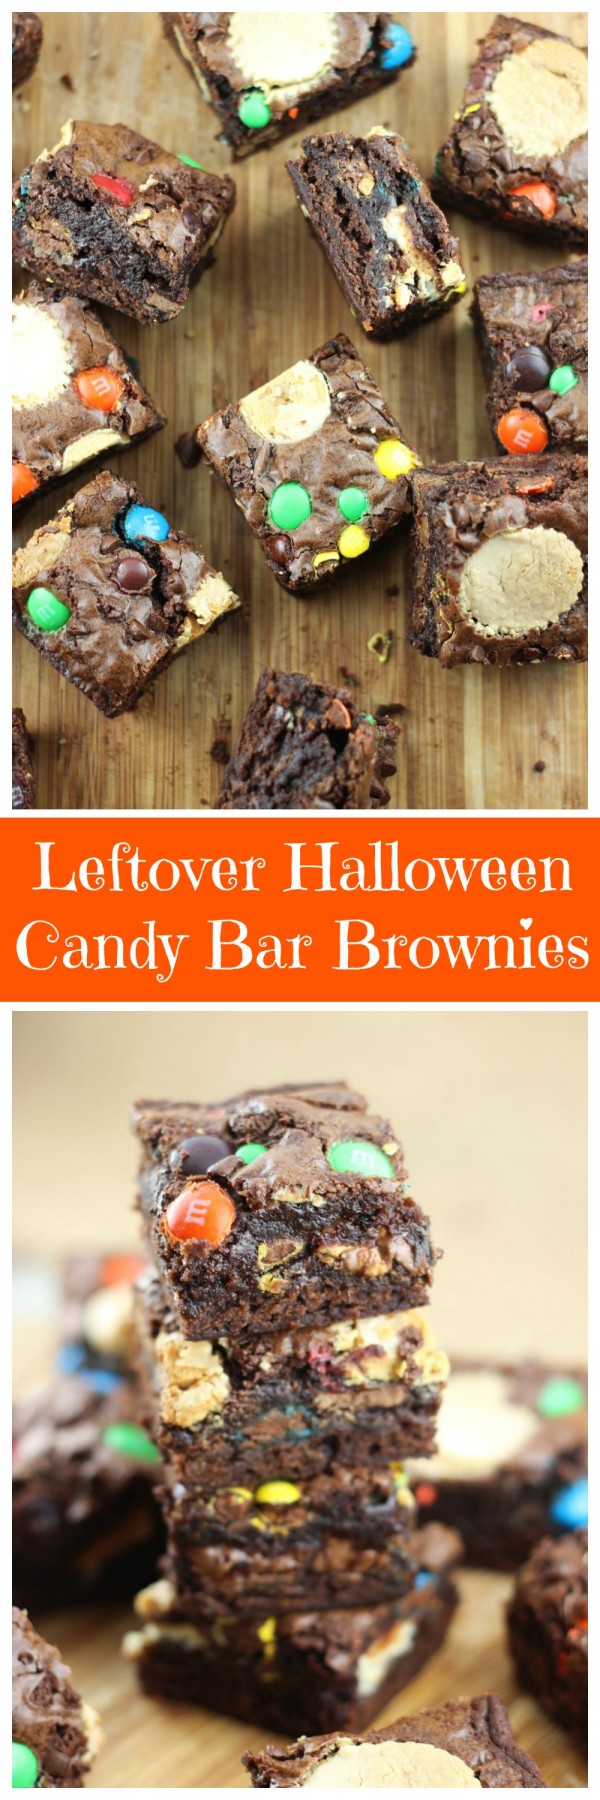 Leftover Halloween Candy Bar Brownies - The Gold Lining girl